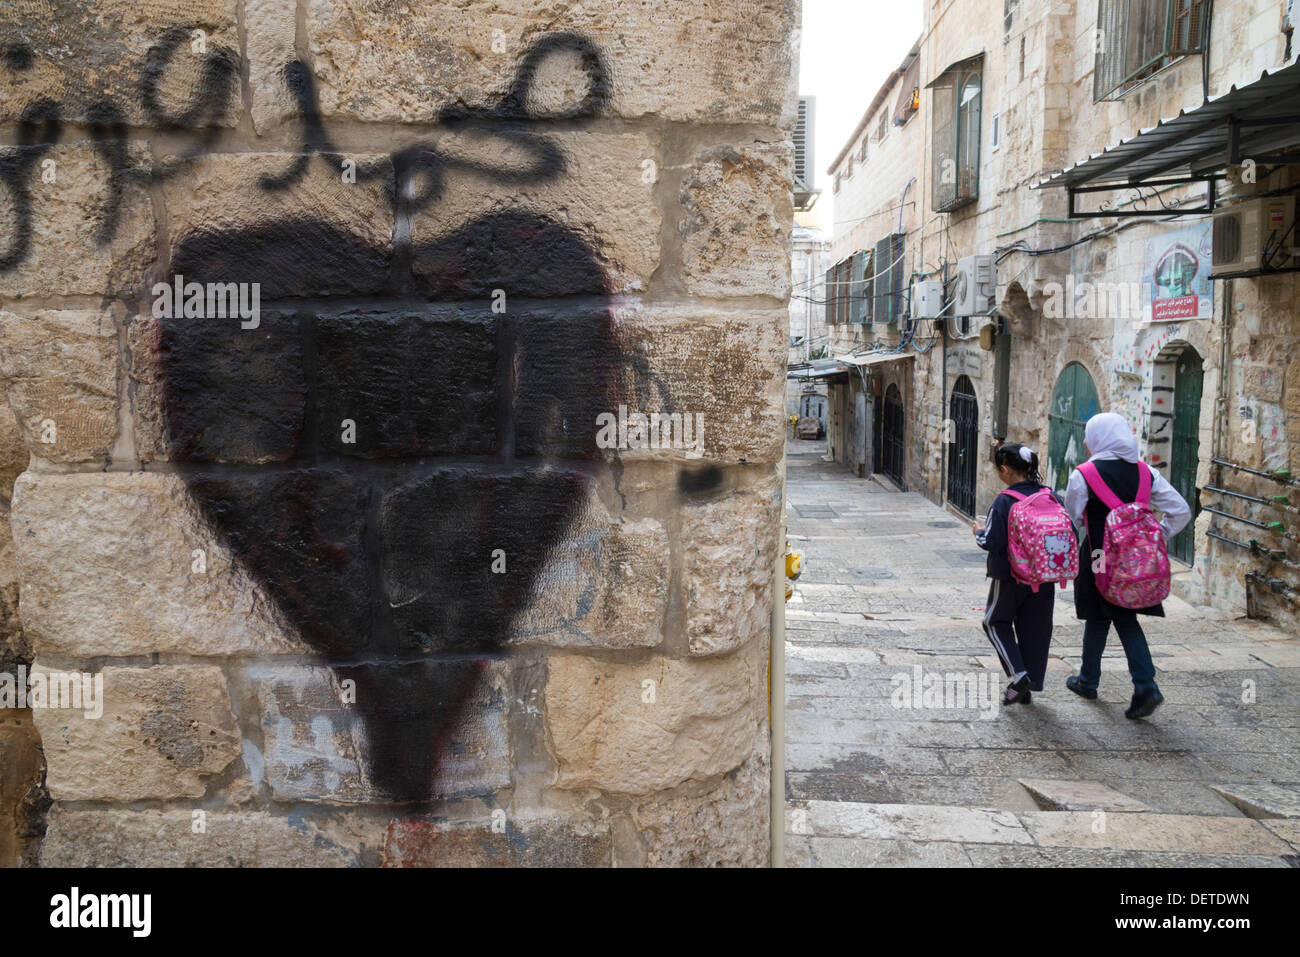 Heart grafitti and two Palestinian schoolgirls in the streets. Jerusalem Old City. Israel. Stock Photo